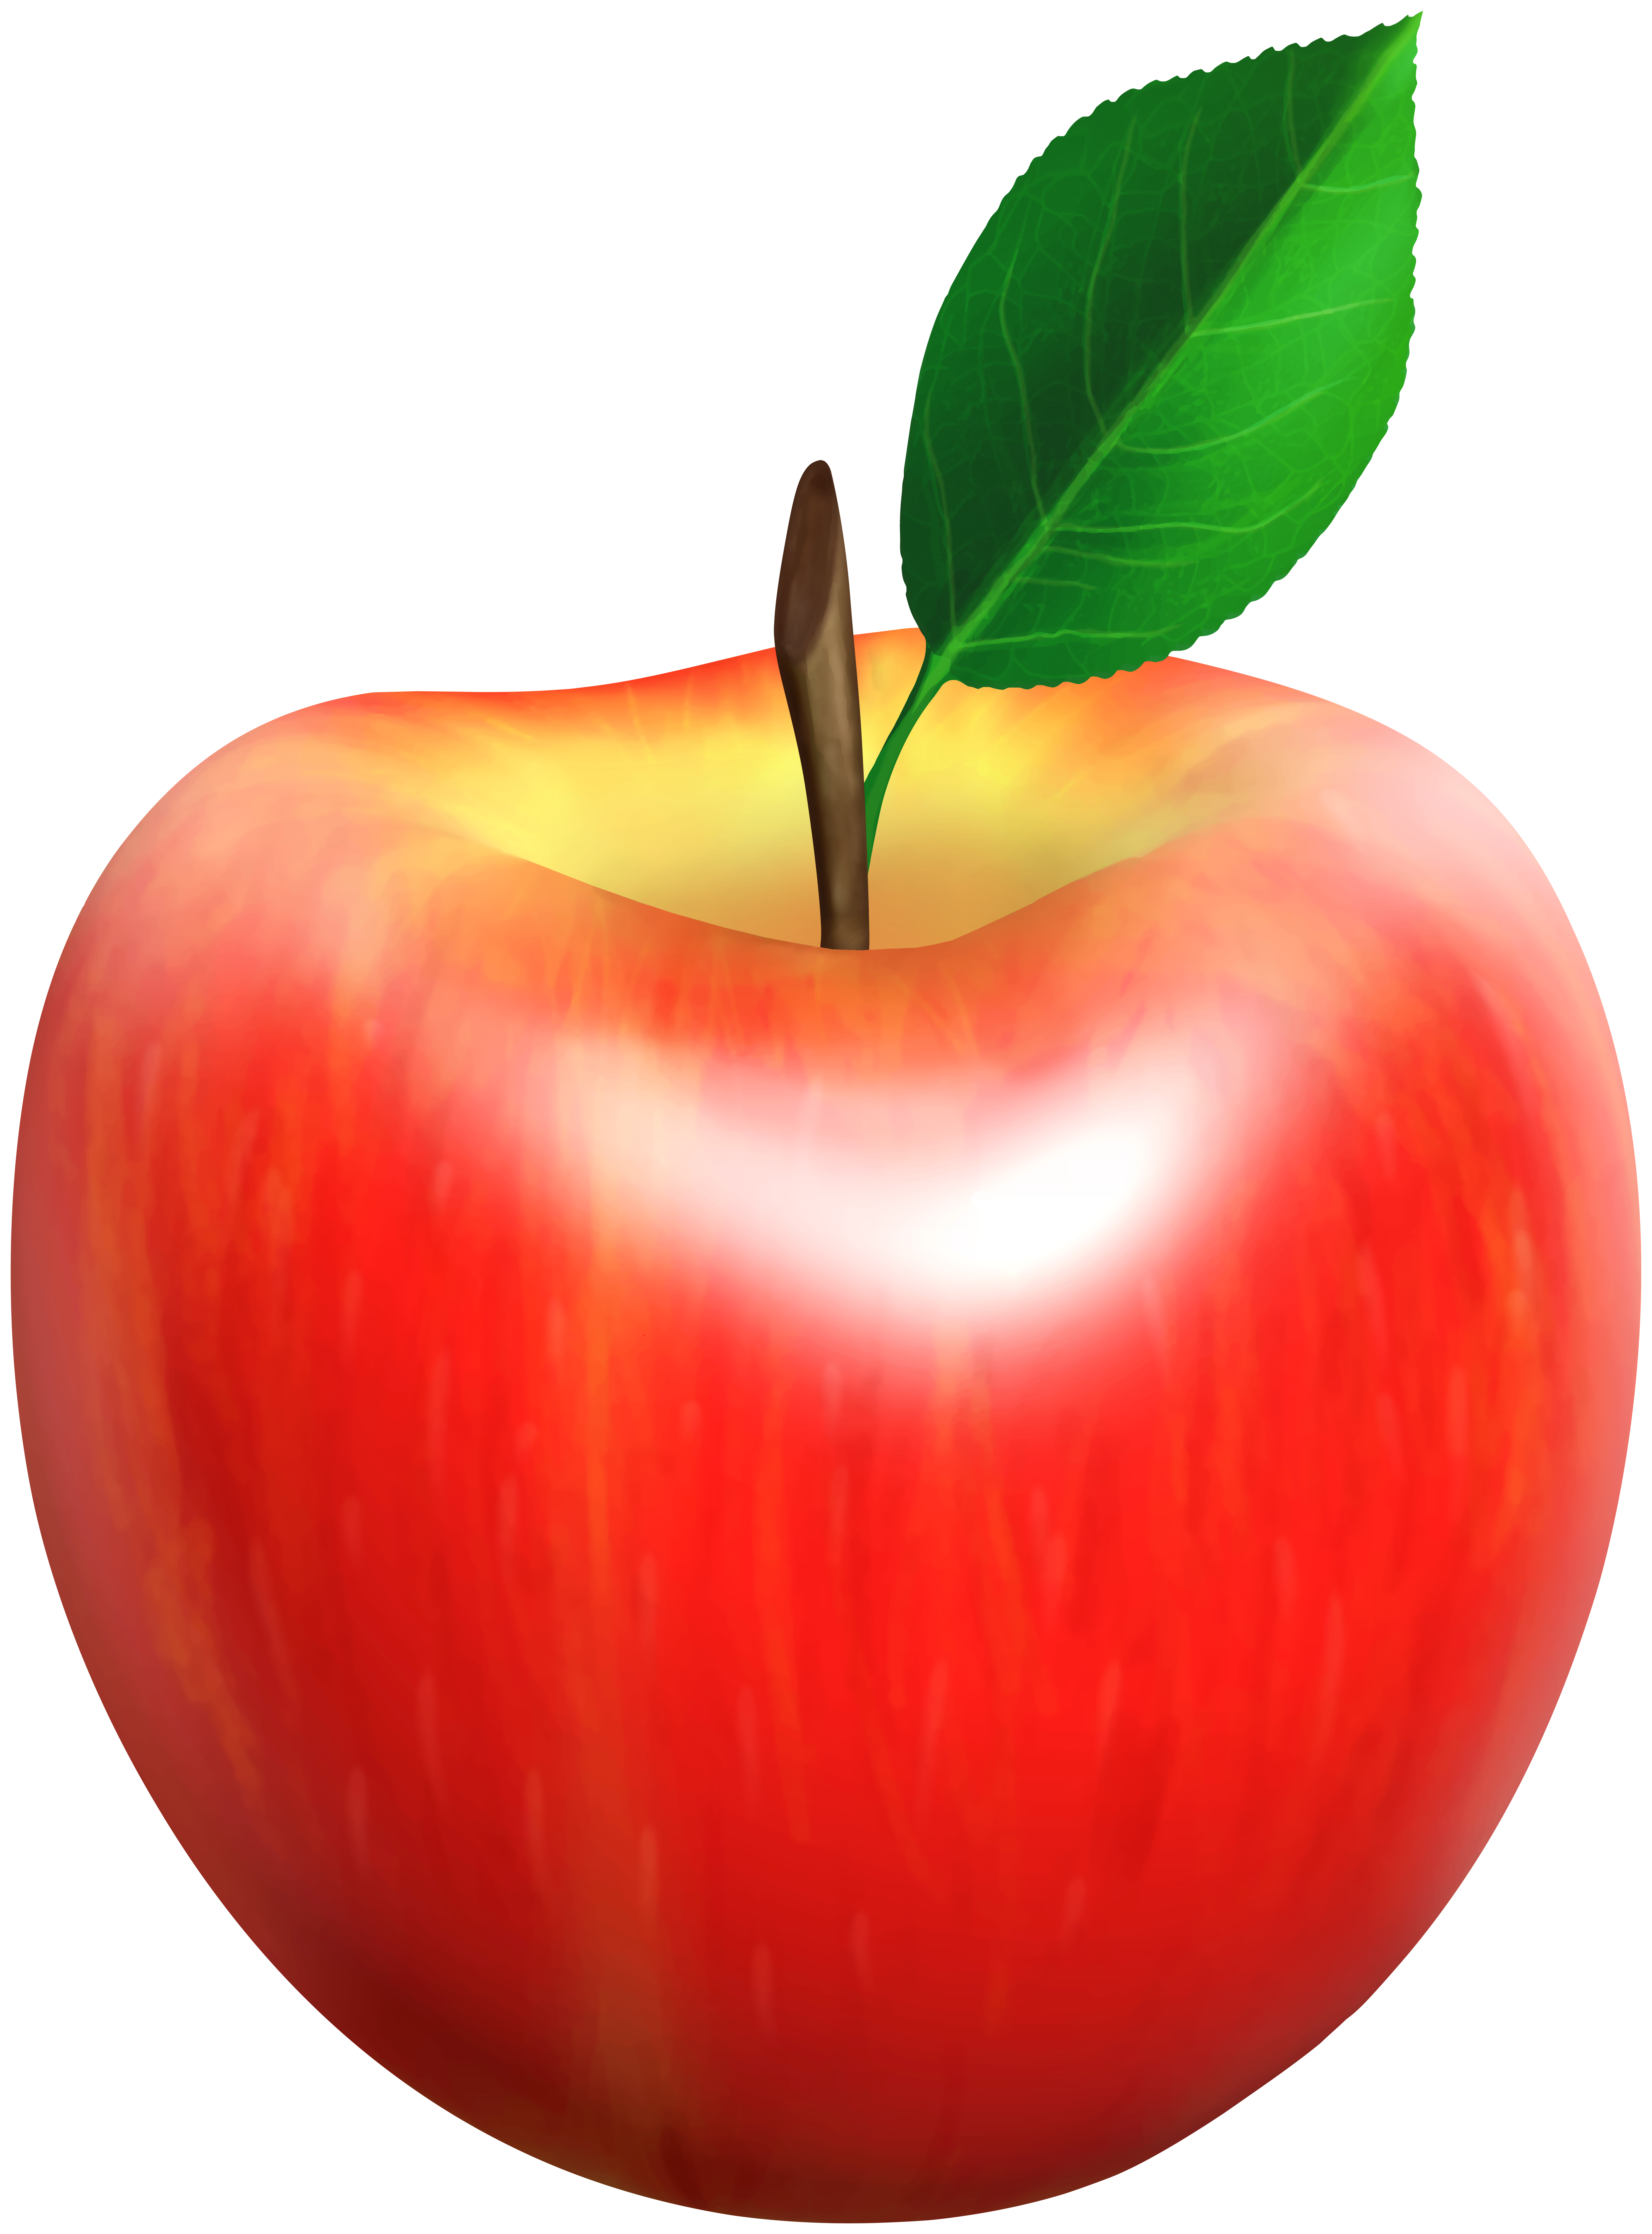 Fresh Apple PNG Clip Art Image | Gallery Yopriceville ...